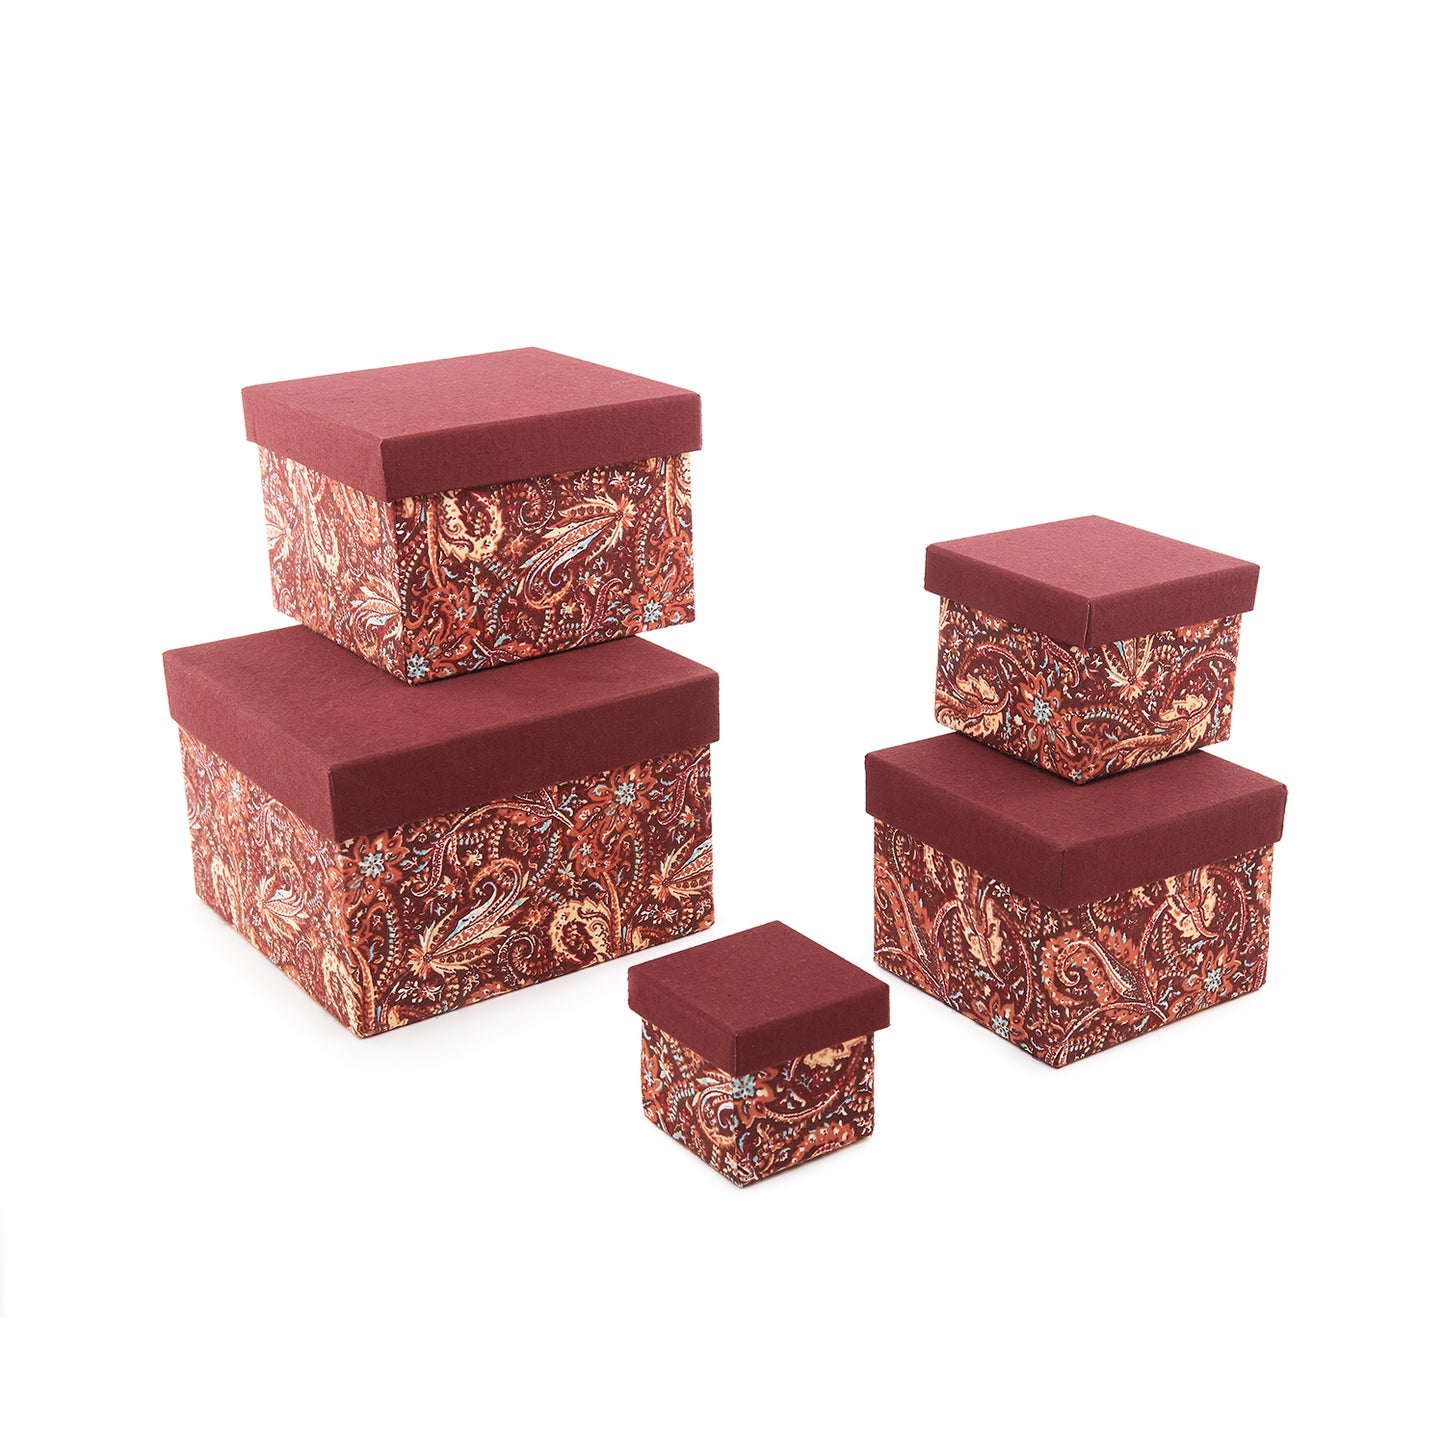 Flowers on a Maroon - Gift Boxes Set of 5